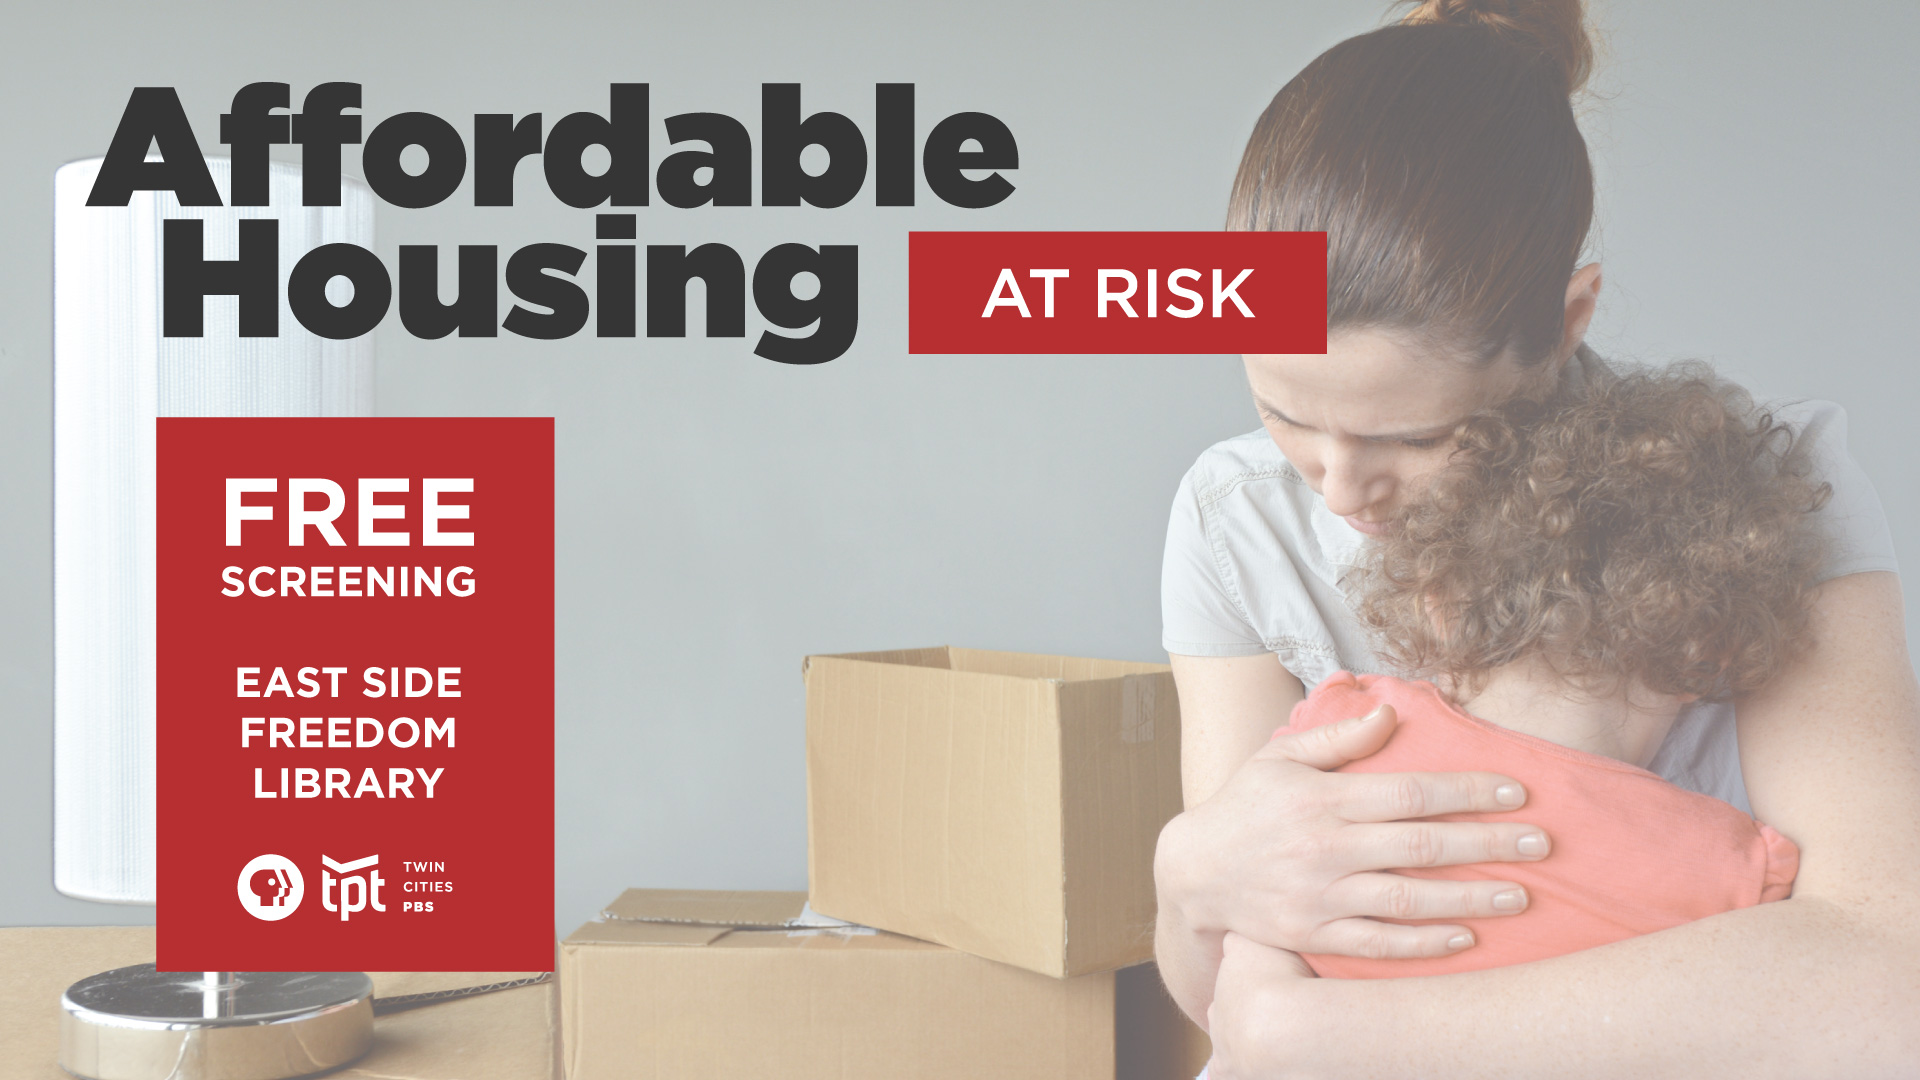 Affordable Housing at Risk: Free Screening at East Side Freedom Library